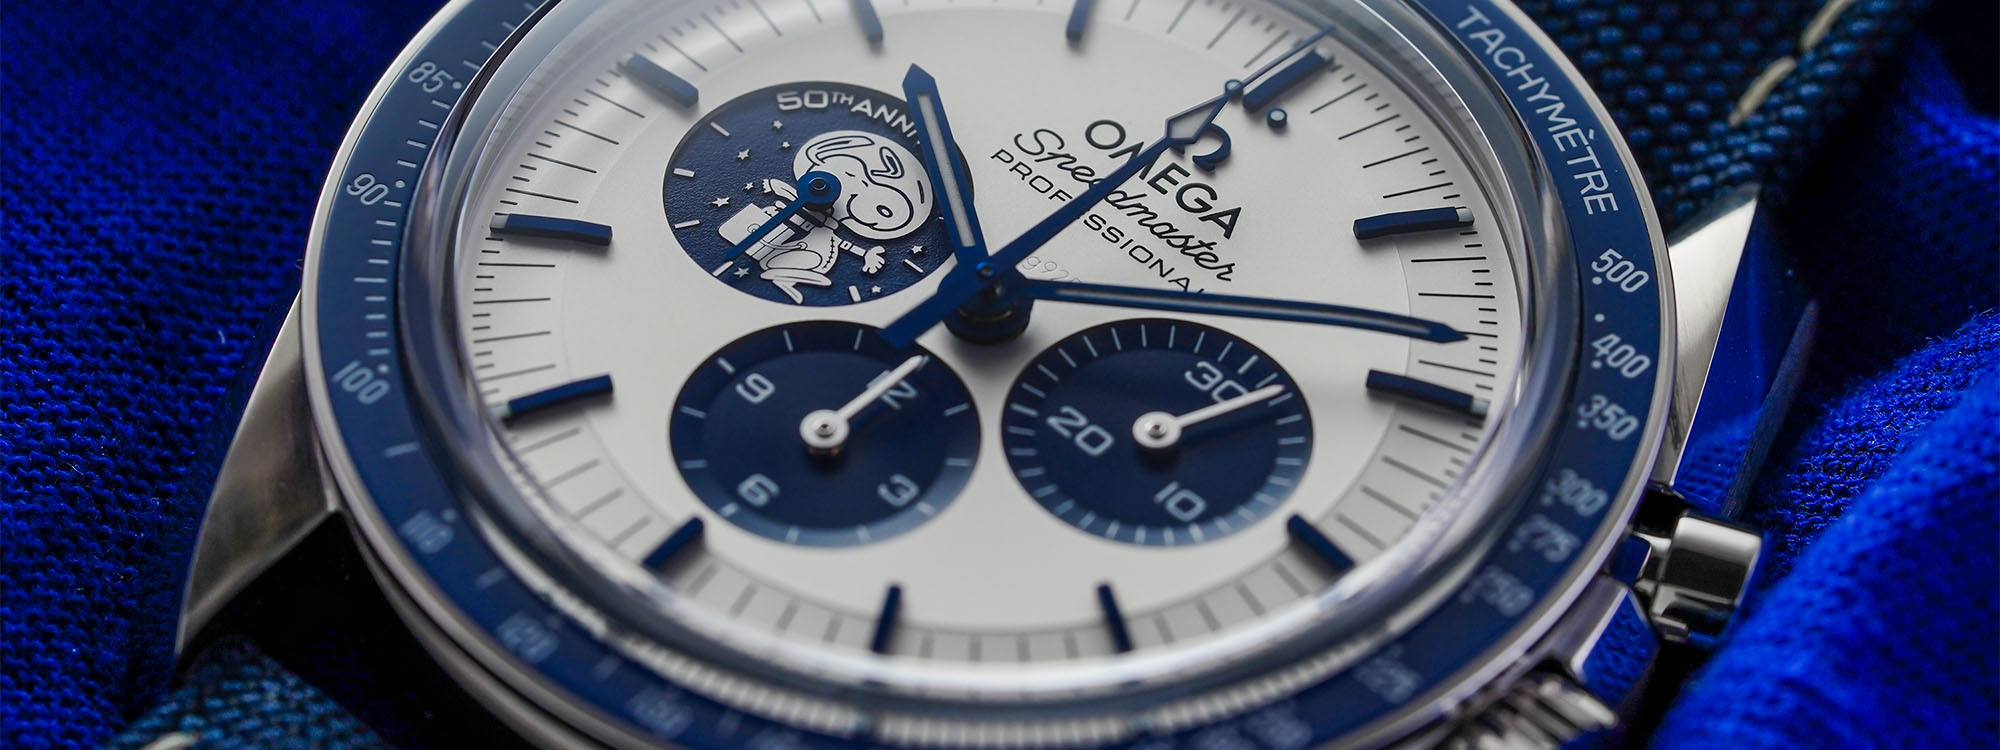 Omega Speedmaster Snoopy: The Story Behind the Most Collectible Moonwa |  Teddy Baldassarre